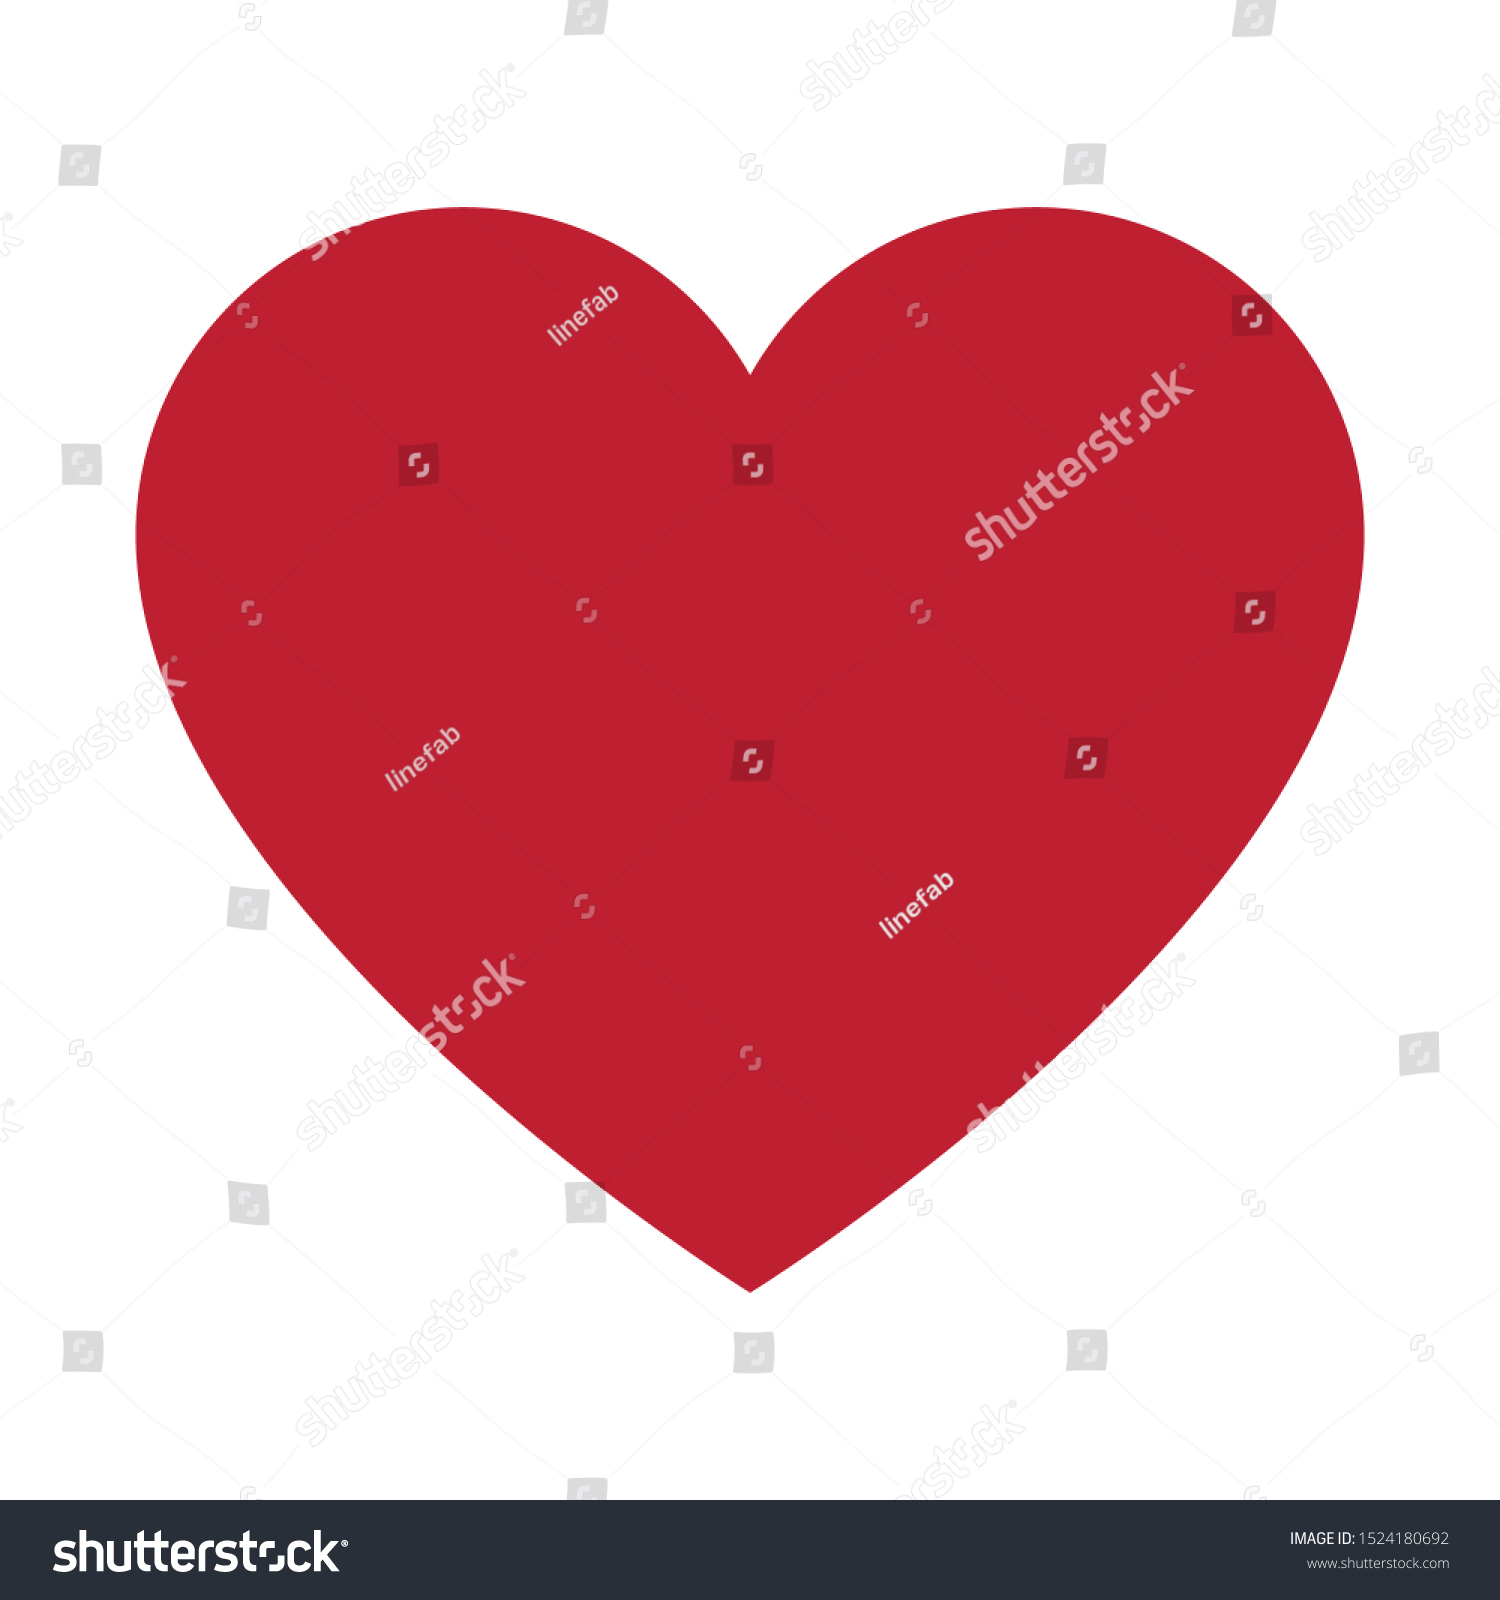 Heart Icon for Romance and Love #1524180692